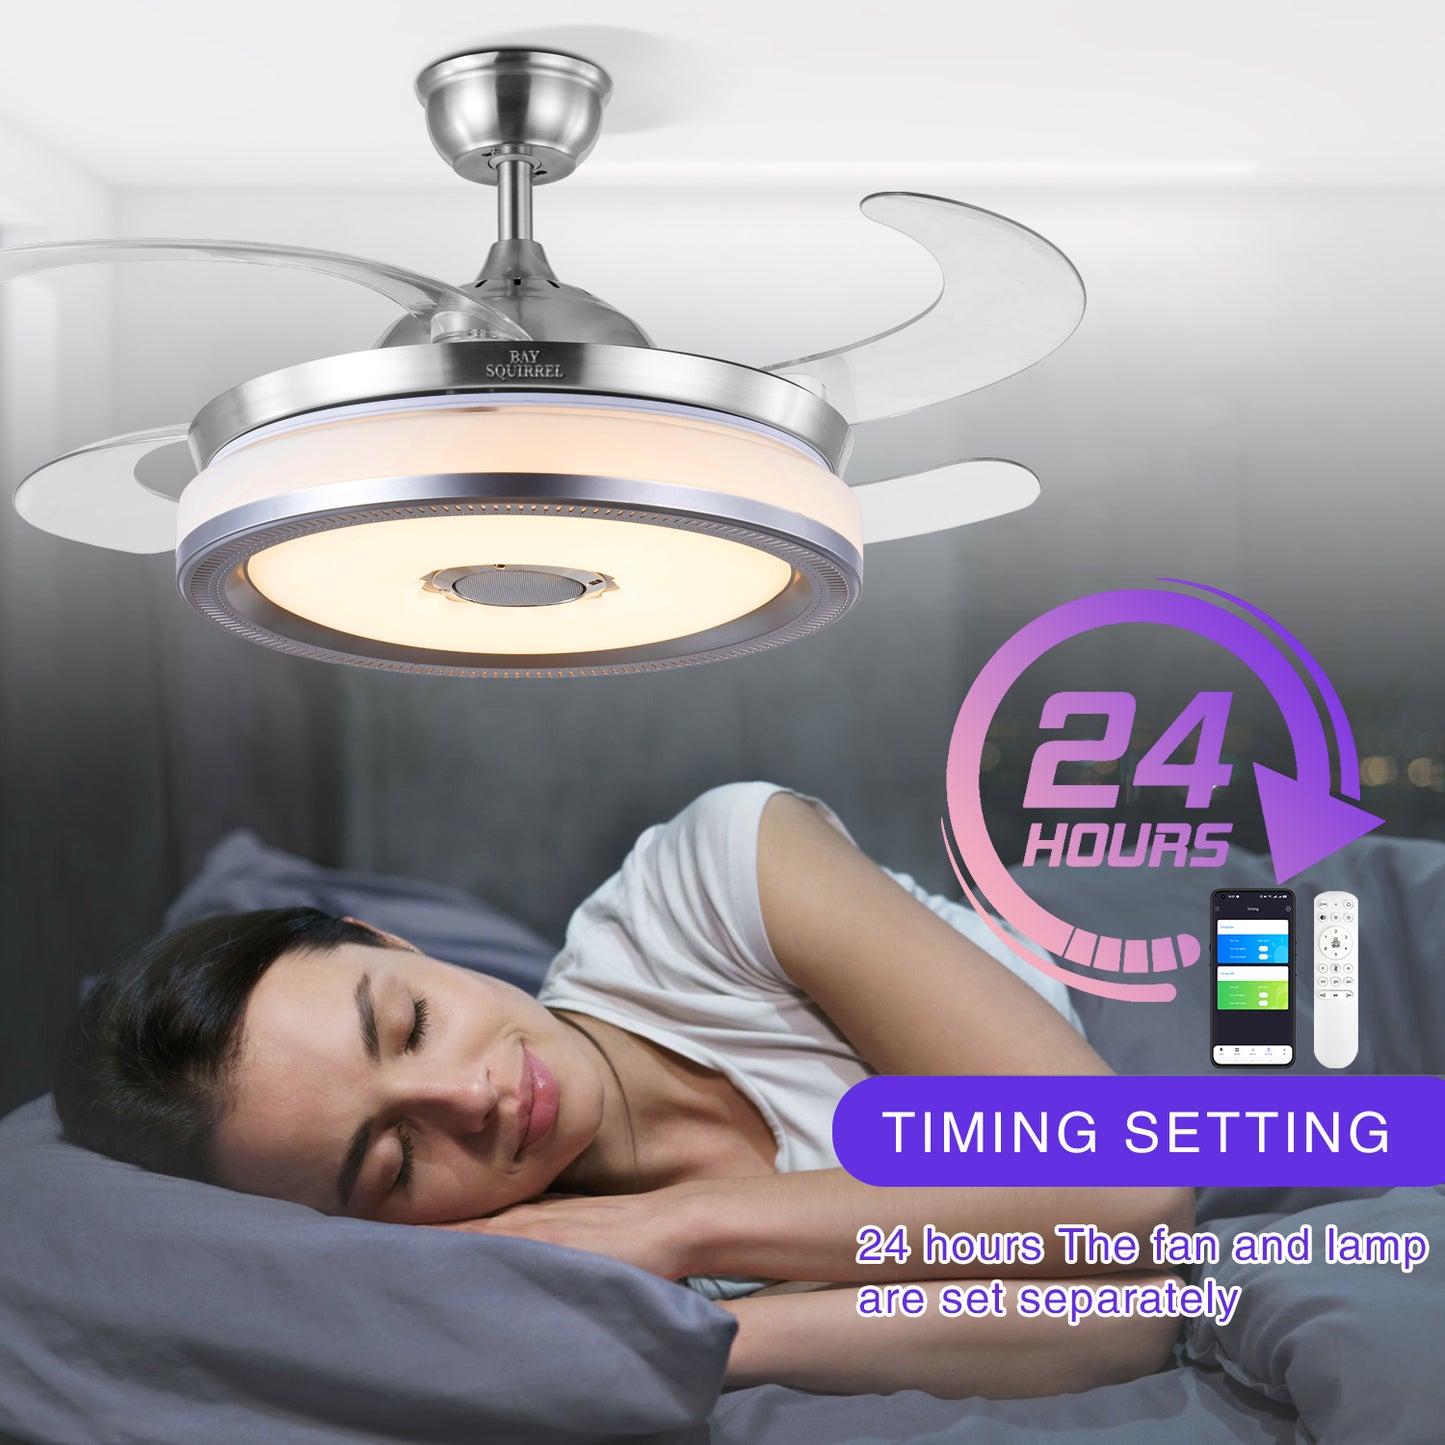 BAYSQUIRREL Retractable Bluetooth Ceiling Fan with Speaker, Many Kinds of Color Light Bluetooth Ceiling Fan with Light,6 Speed Reversible Modern Invisible Ceiling Fan,Remote and APP Control